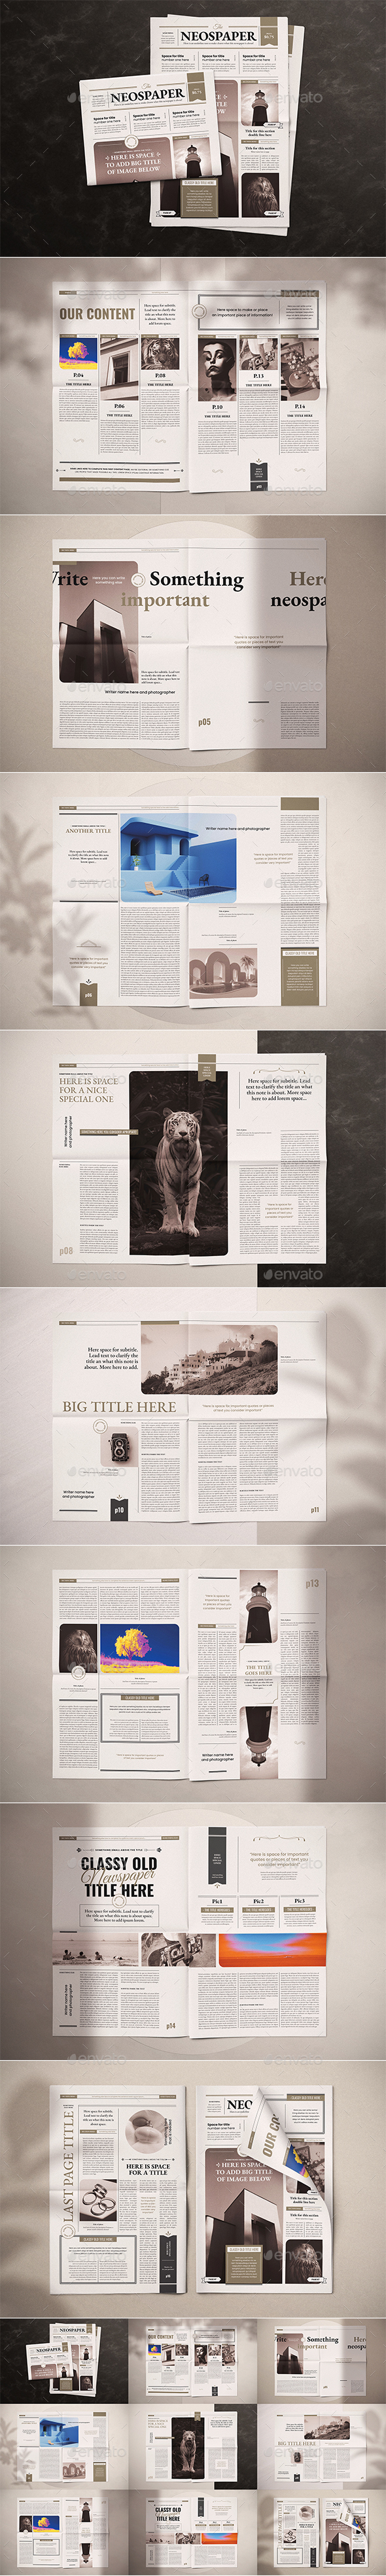 The NeoSpaper Indesign Template